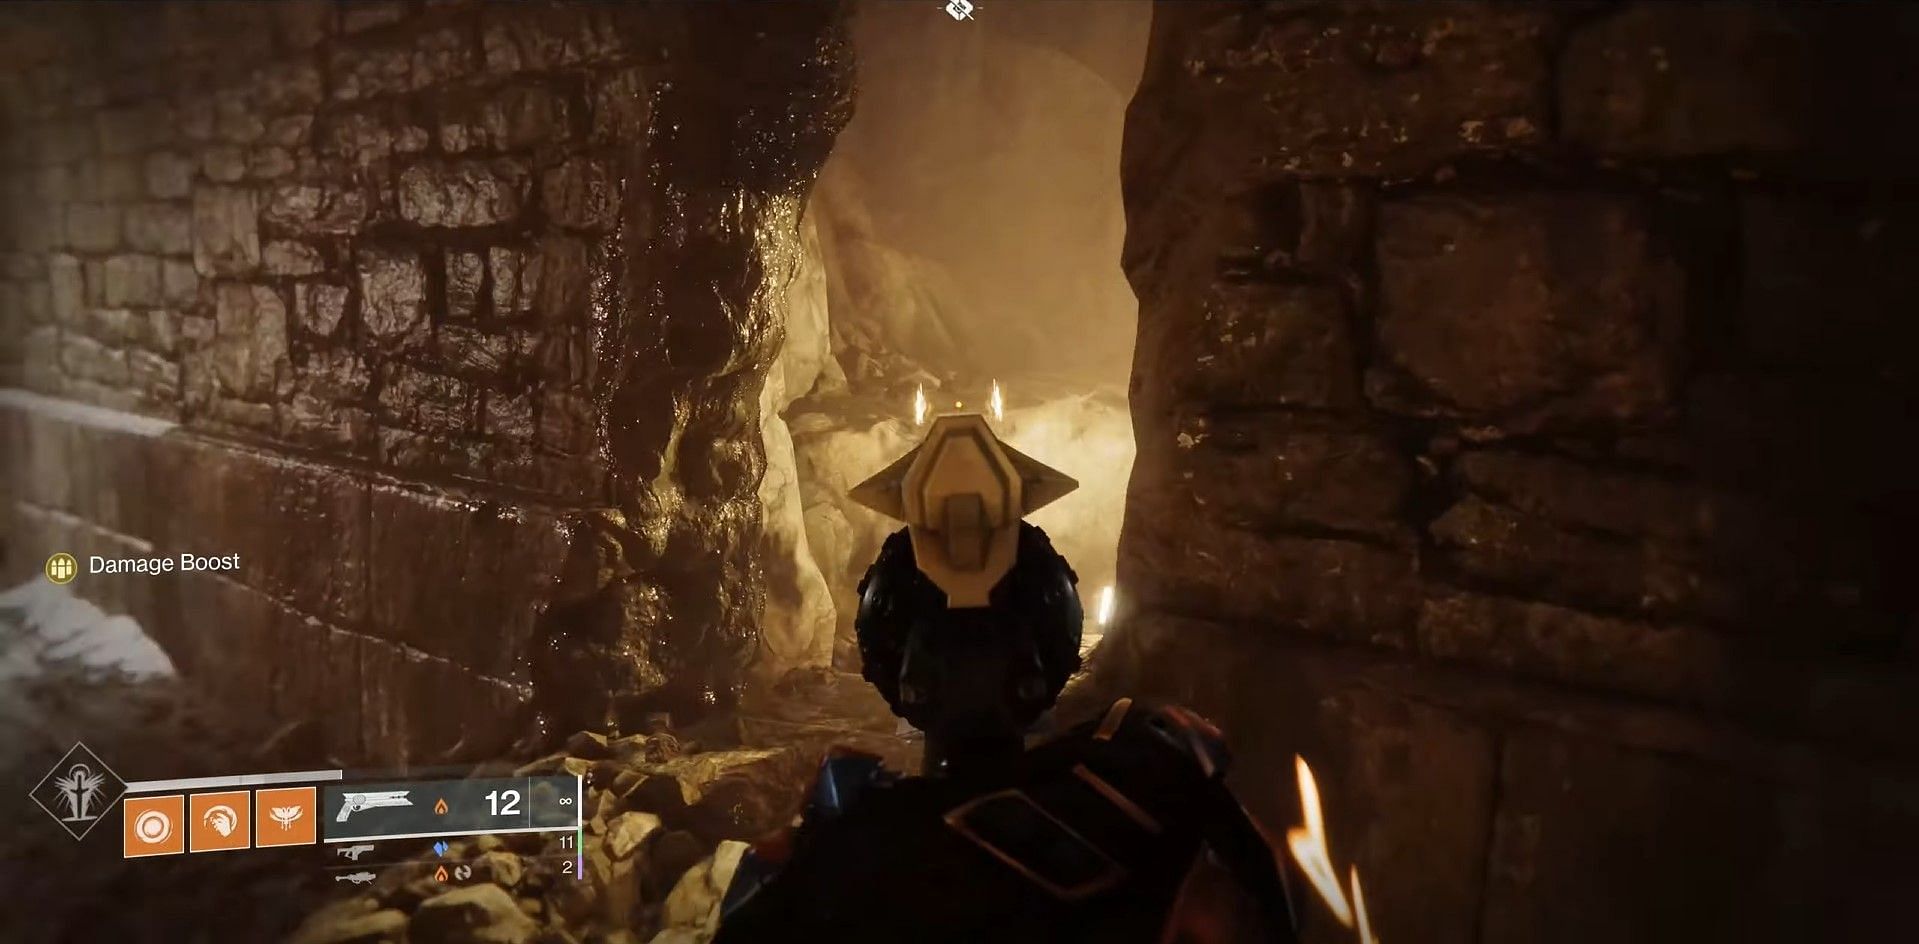 A small gap in the wall in Destiny 2 (Image via Bungie)